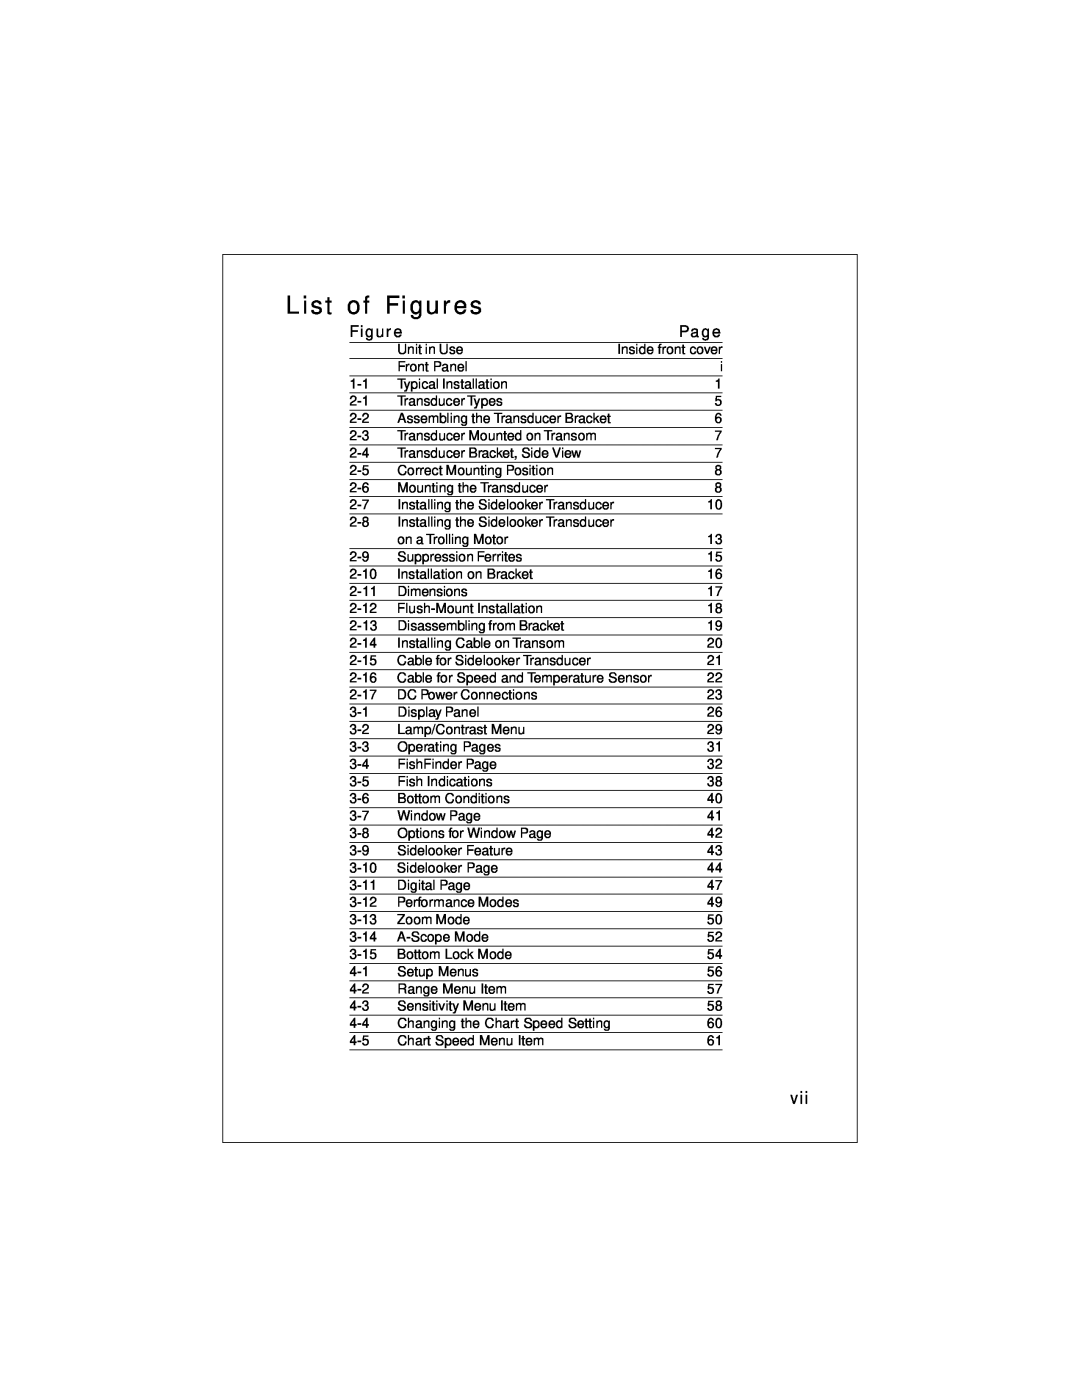 Raymarine L470 instruction manual List of Figures, Page 